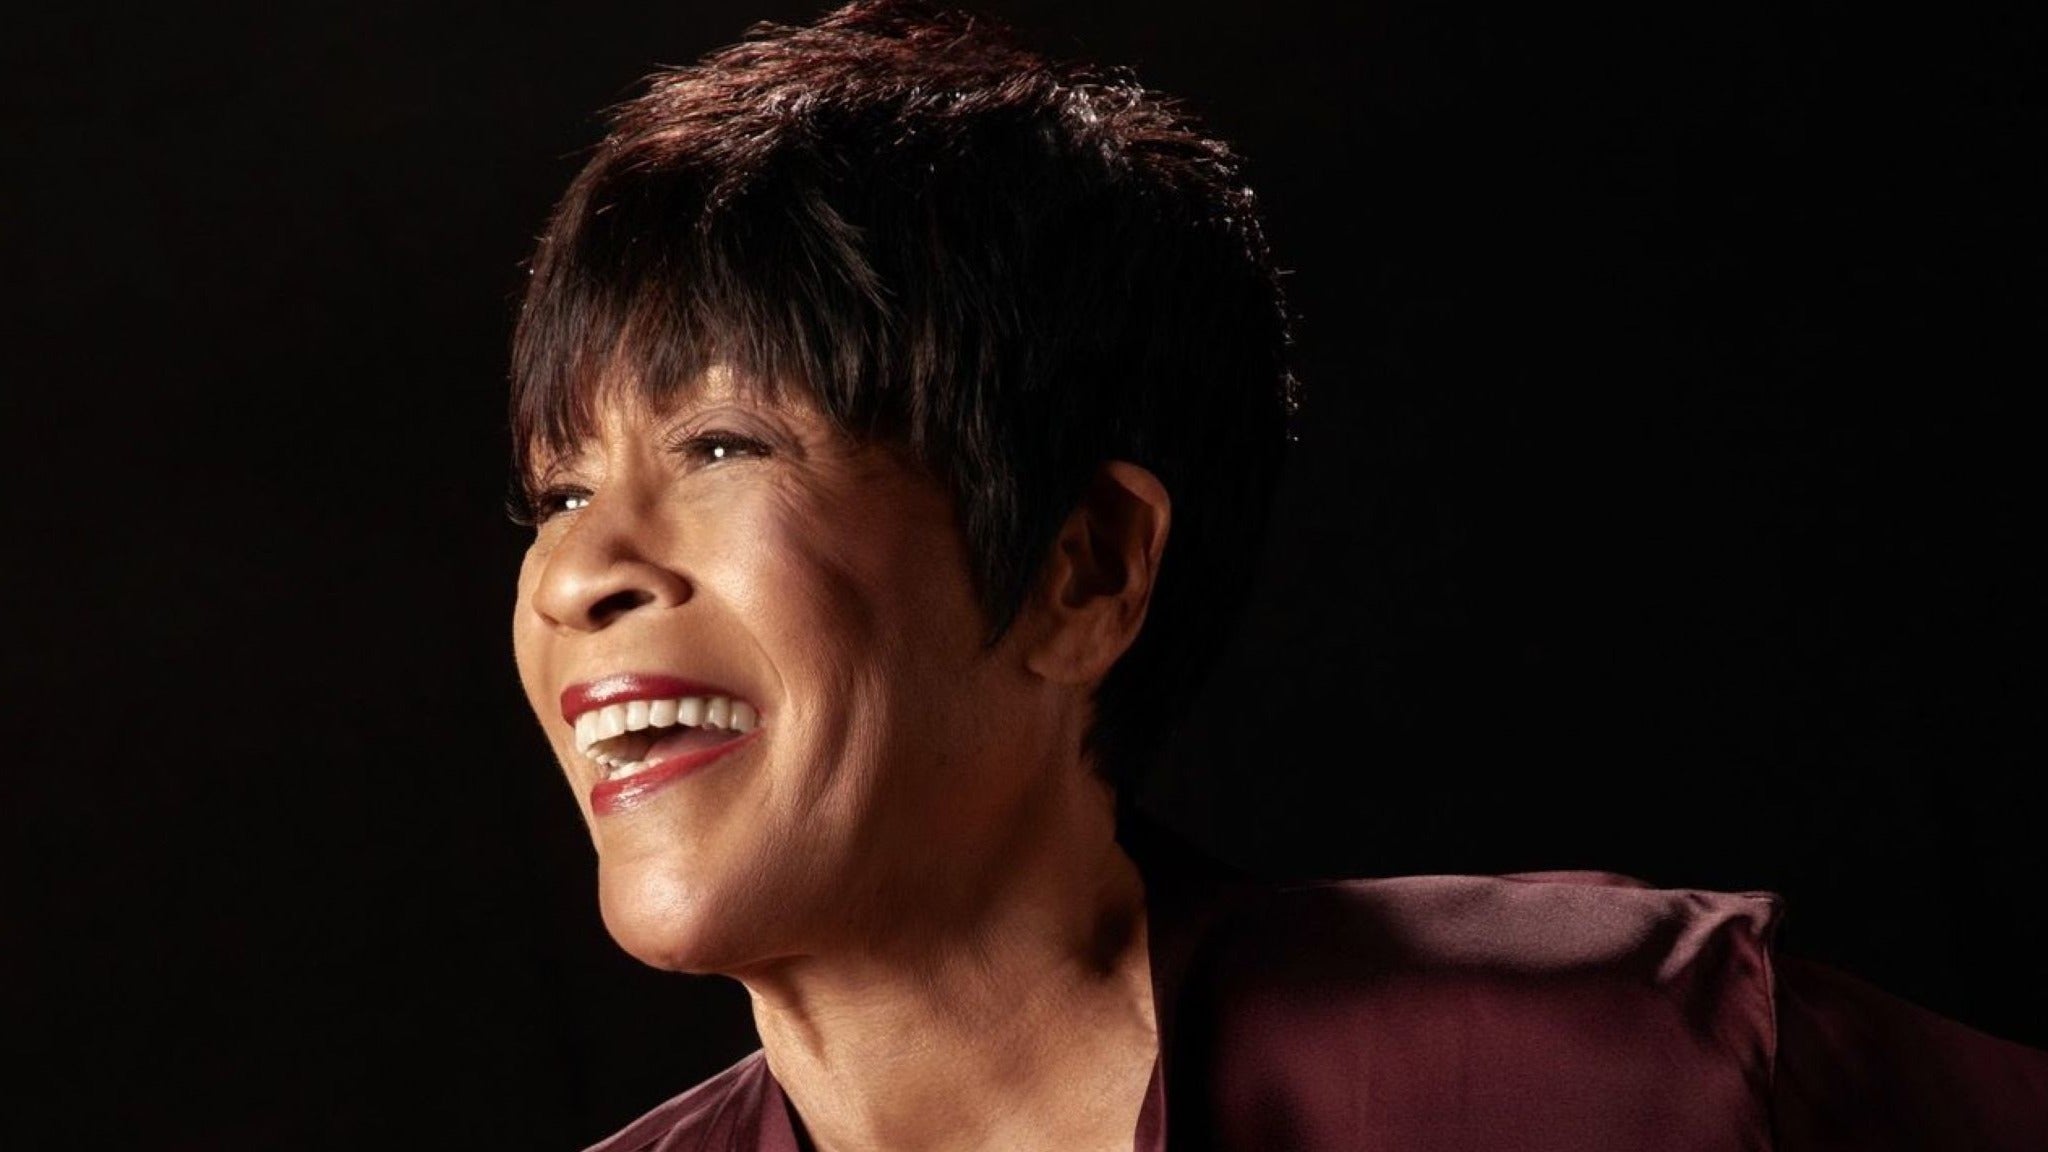 Bettye LaVette in Portsmouth promo photo for Friends Circle presale offer code